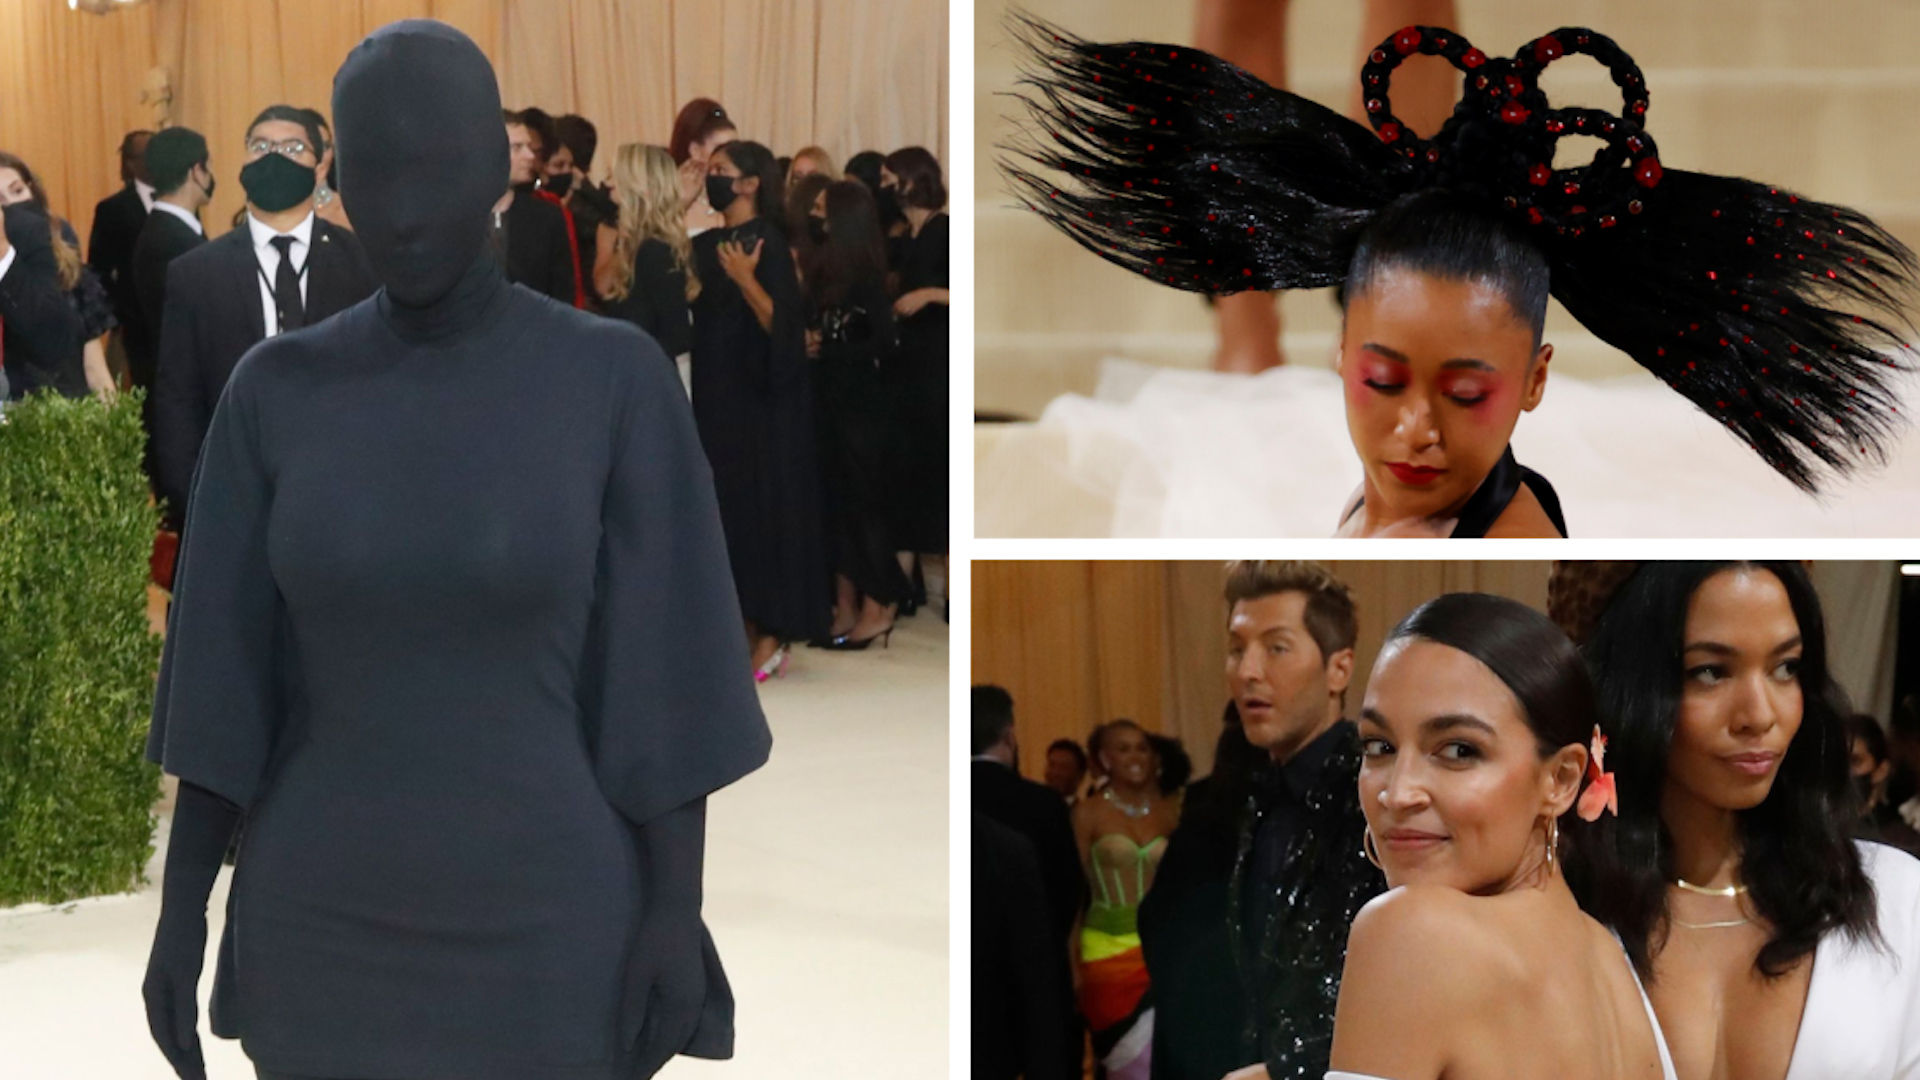 Met Gala 2021 Guest List: All the Celebrities and Influencers Who Have Been  Invited so Far